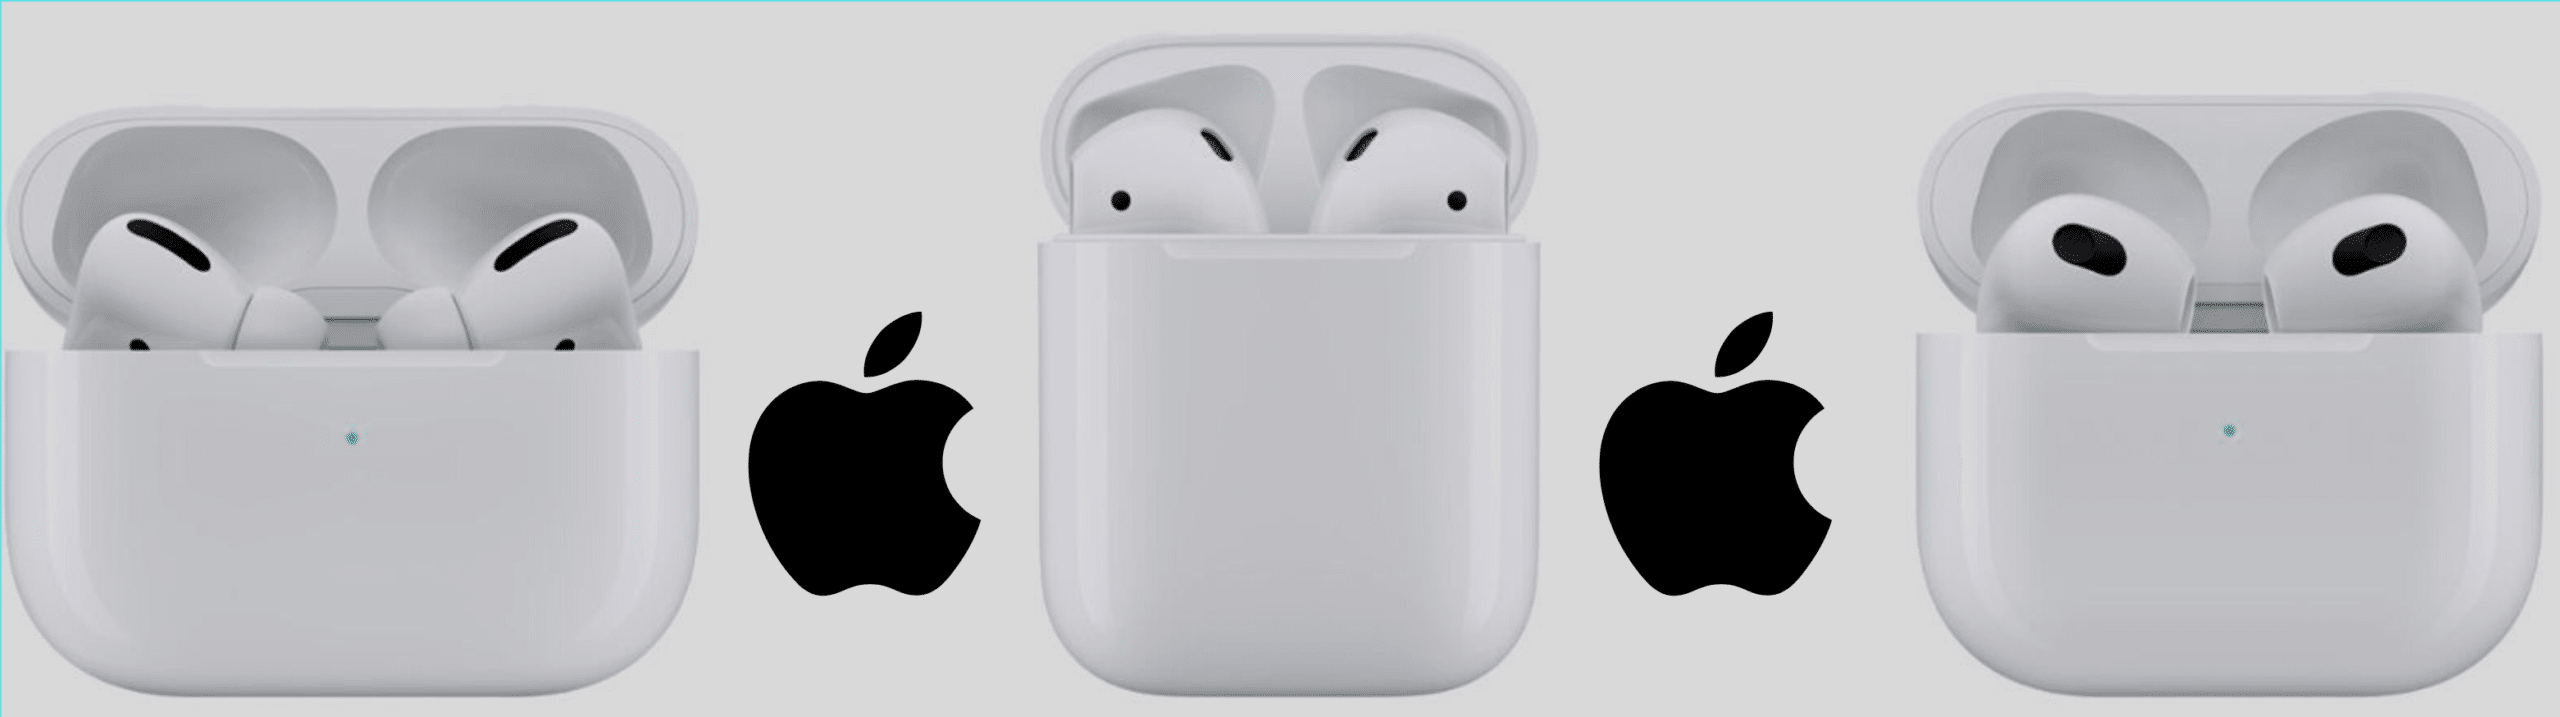 AirPods Lineup